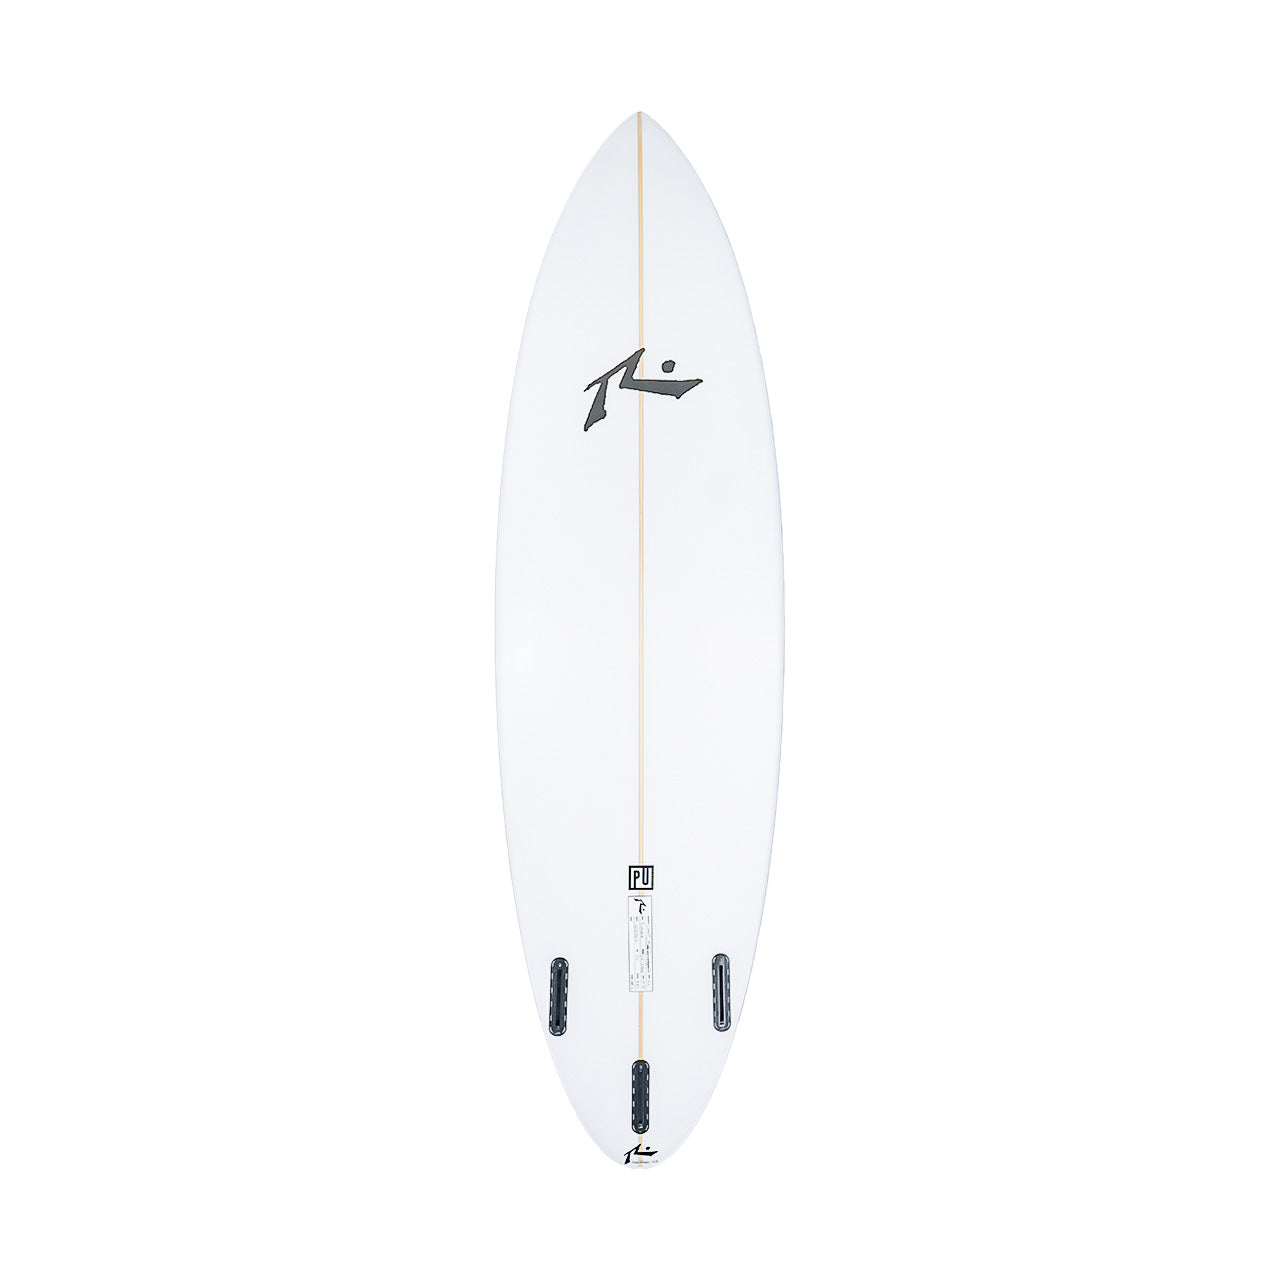 Slayer Step Up Surfboard - Rusty Surfboards - Deck View